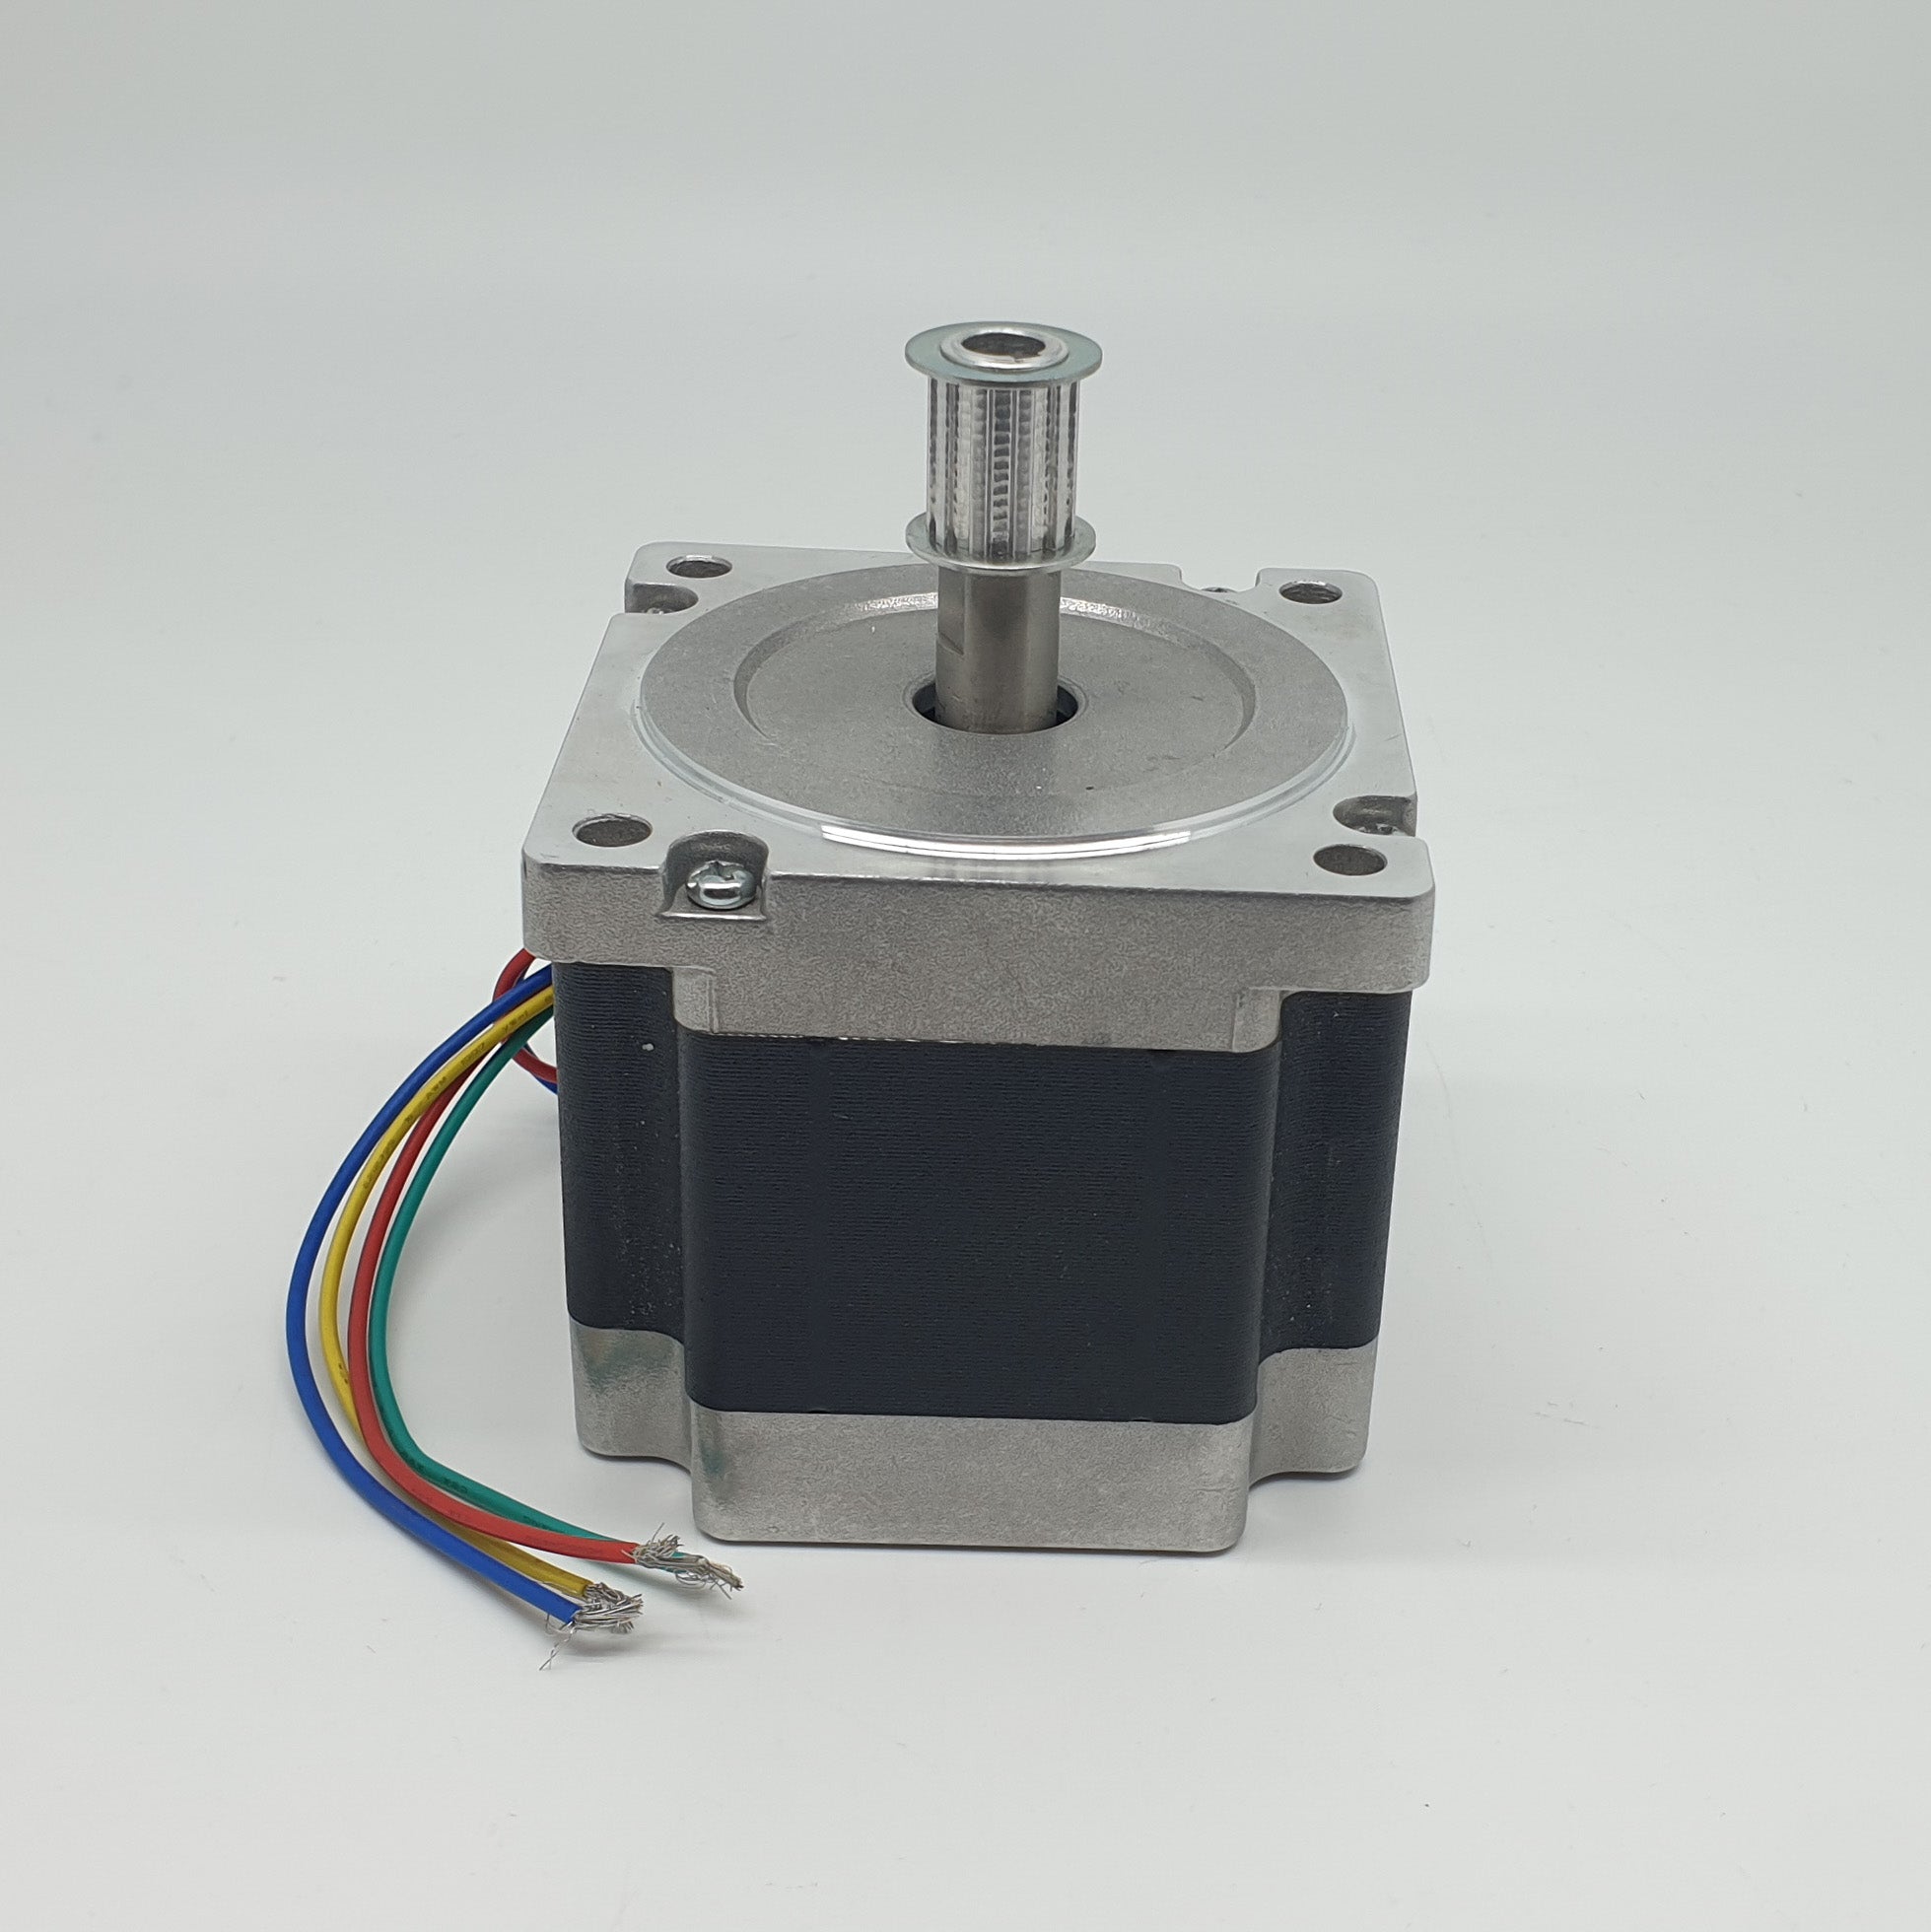 Stepper Motor for CNC 4.6nm X-Axis